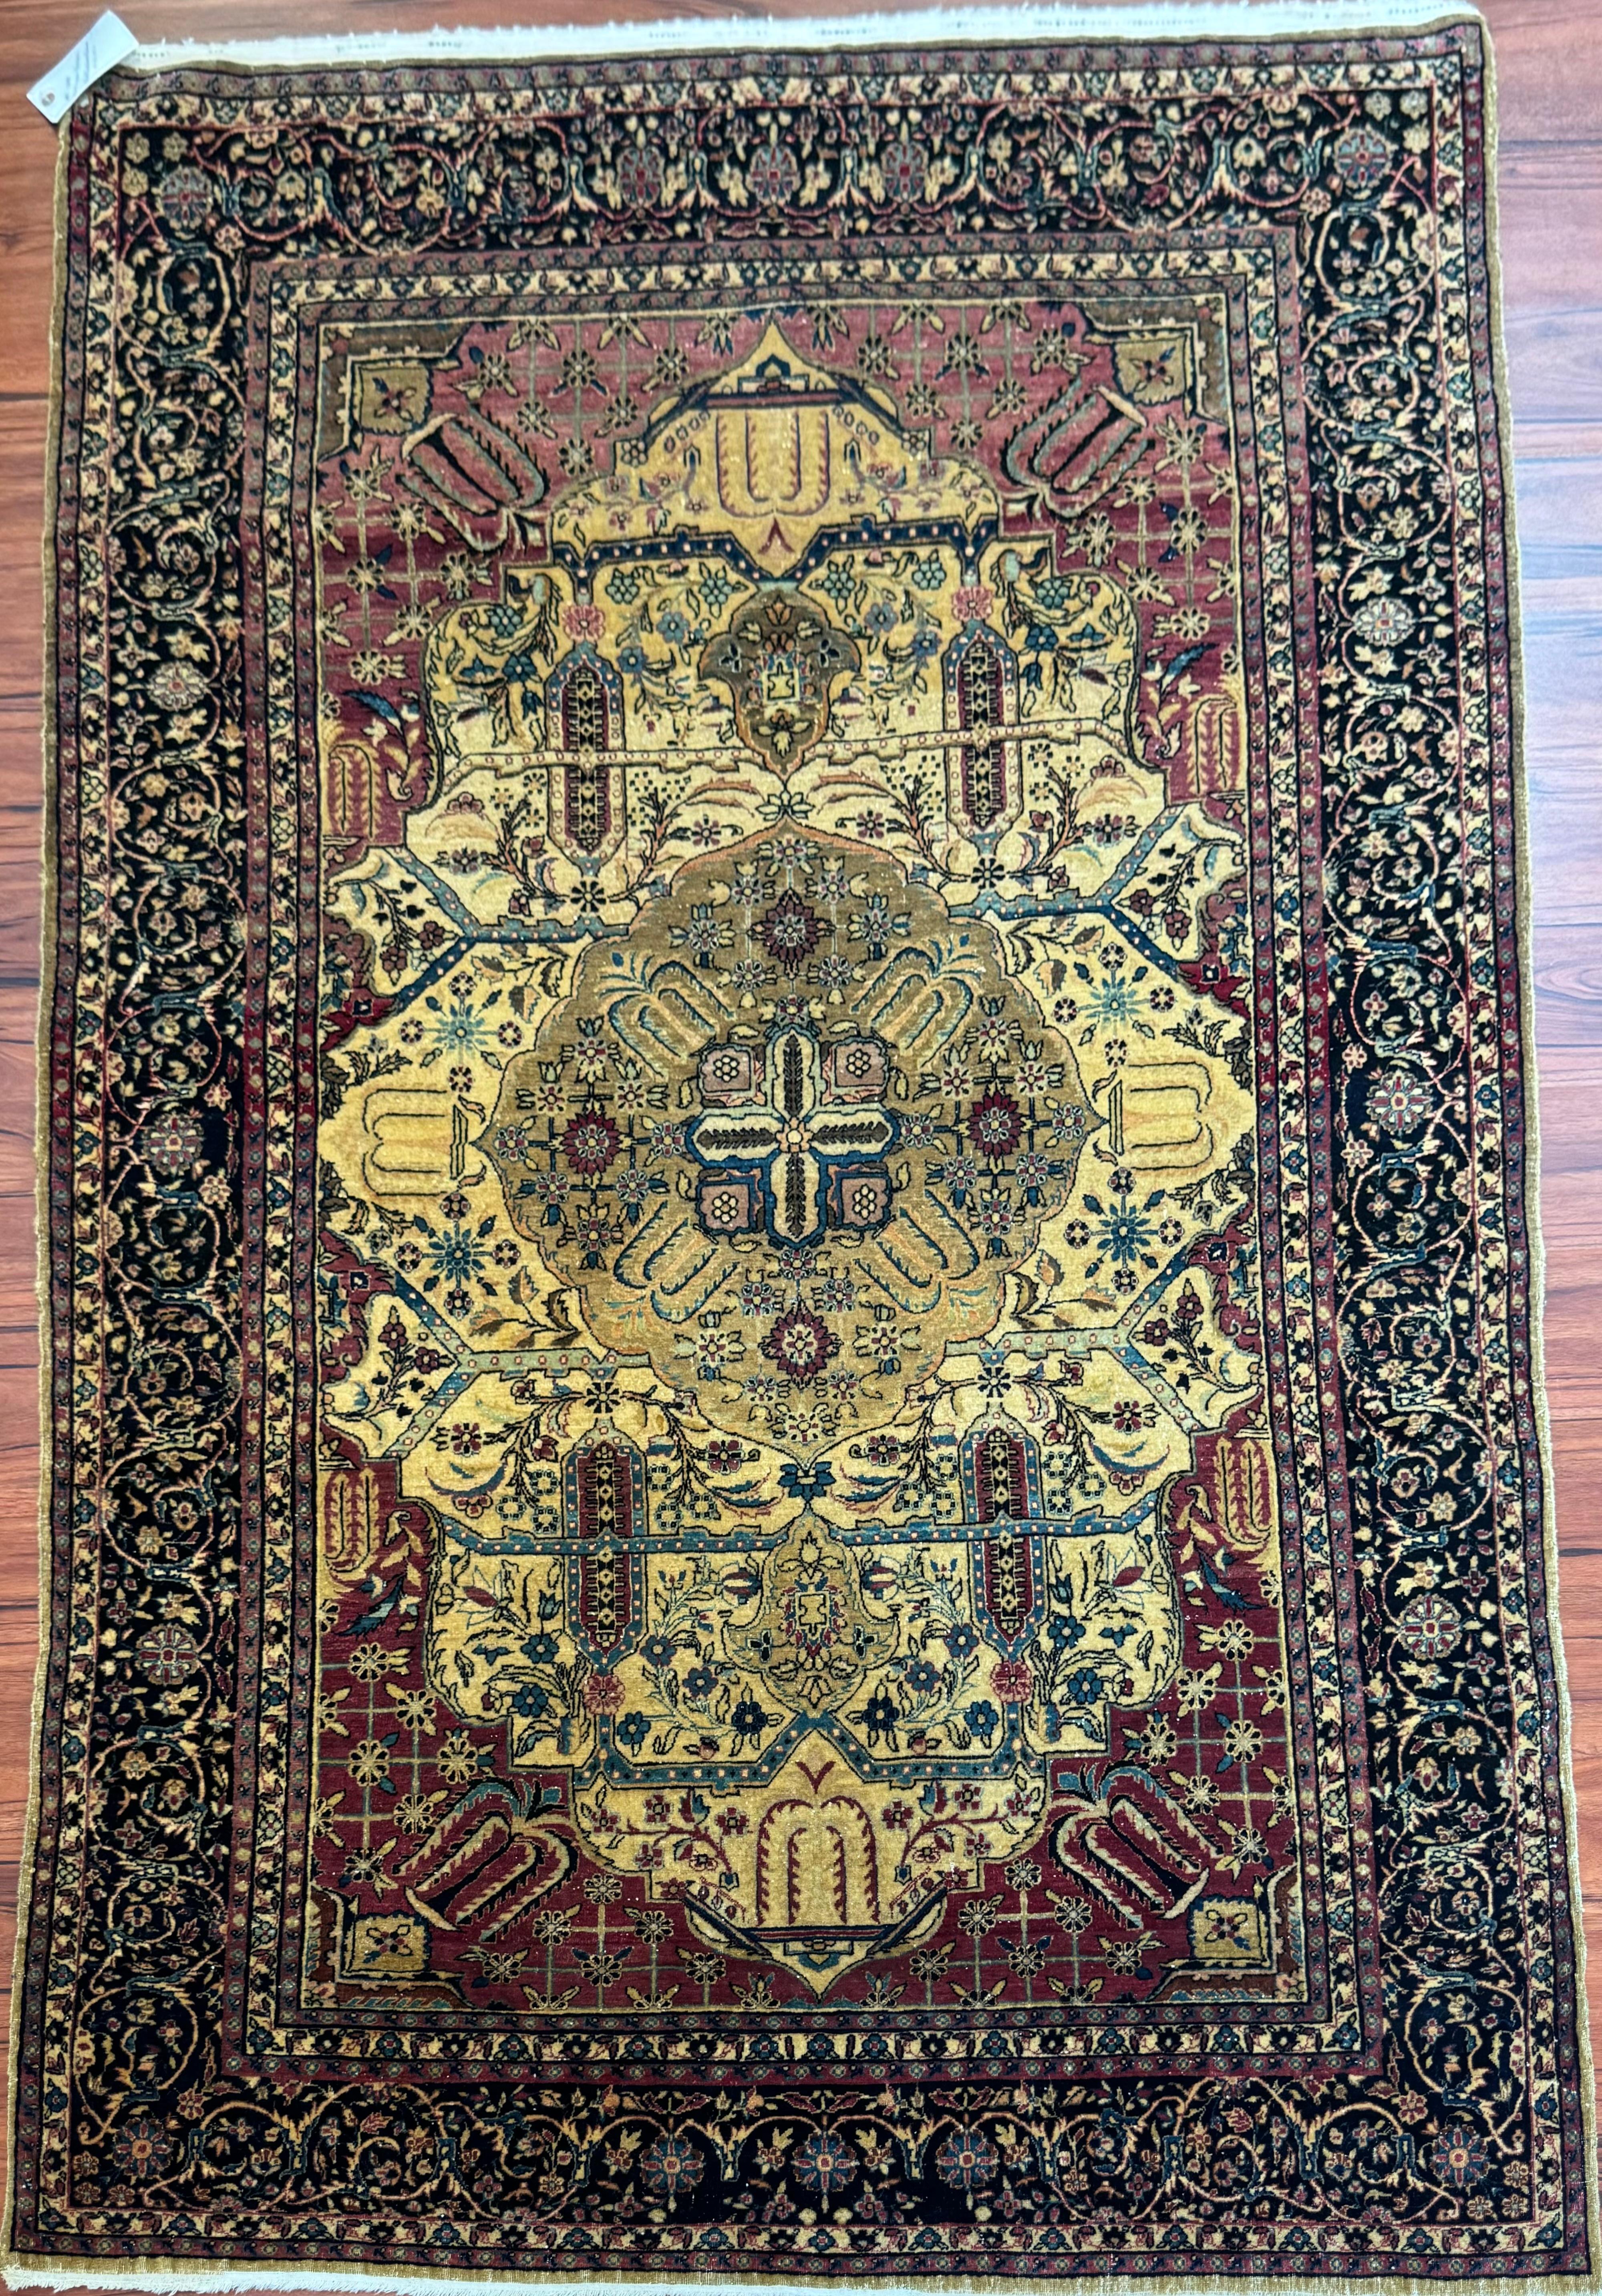 A stunning Antique Persian Kashan Rug that originates from Iran from the early 1900s. This rug is in near excellent condition considering its rich history and is truly gorgeous!